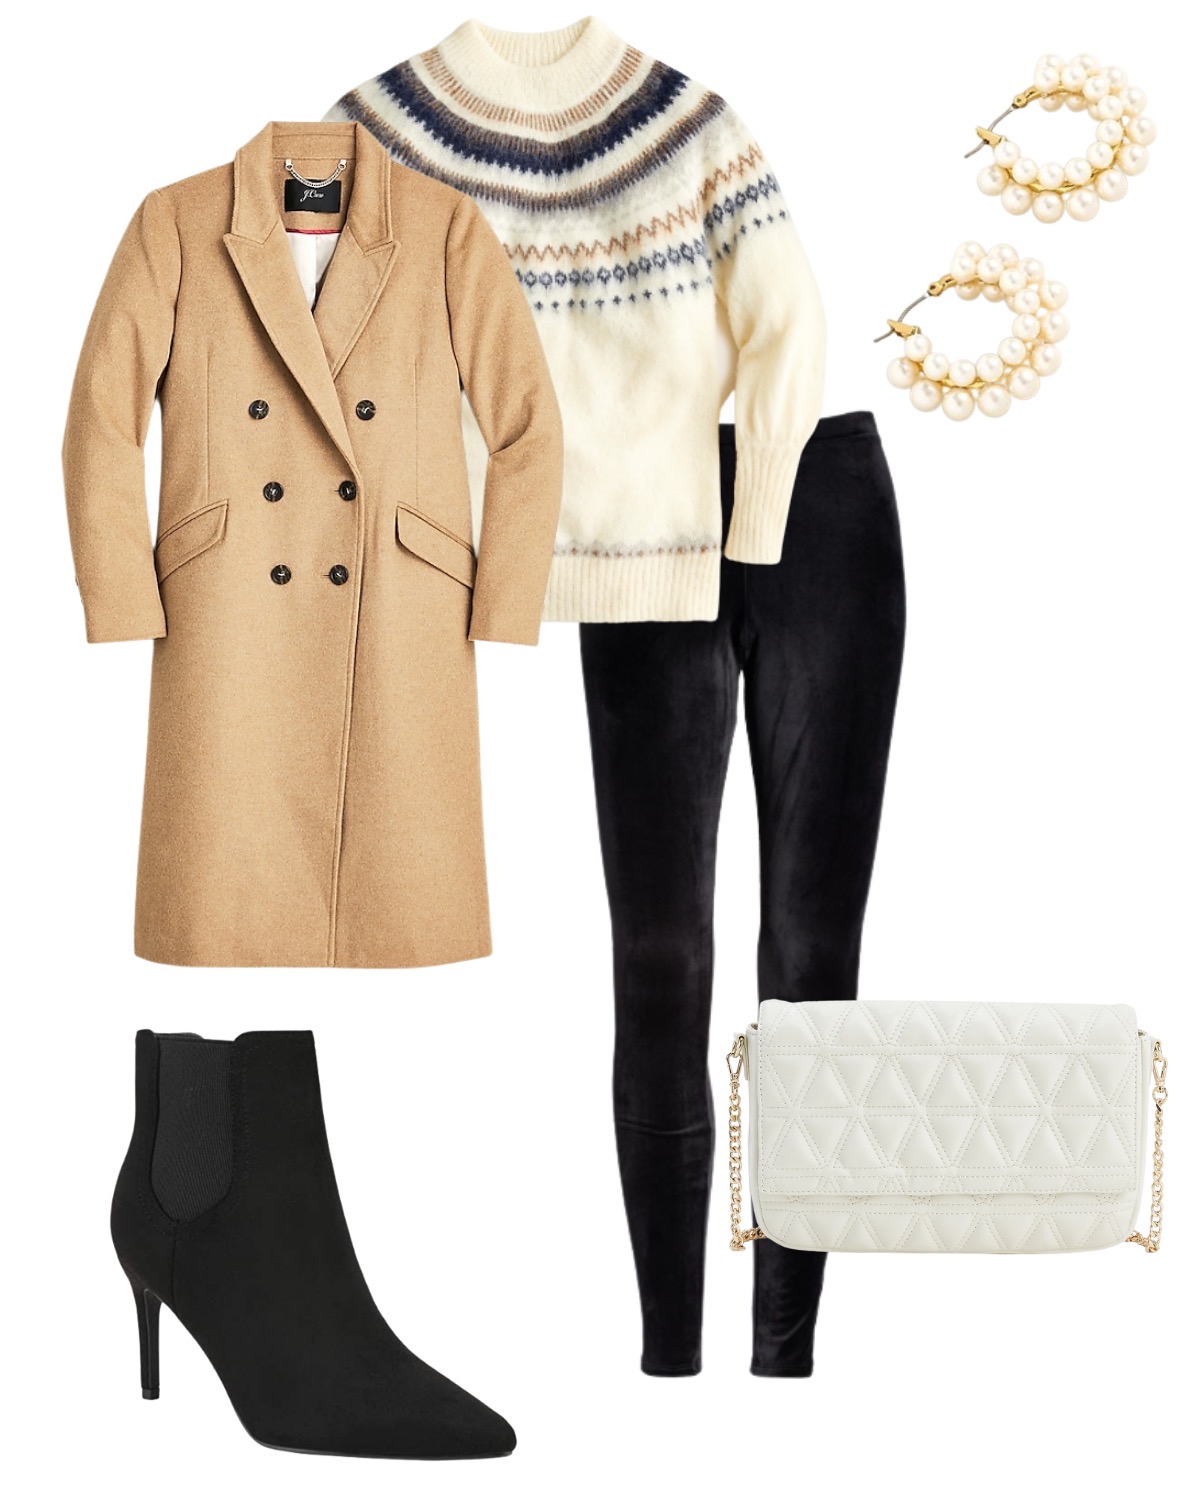 J.Crew Holiday outfit style board